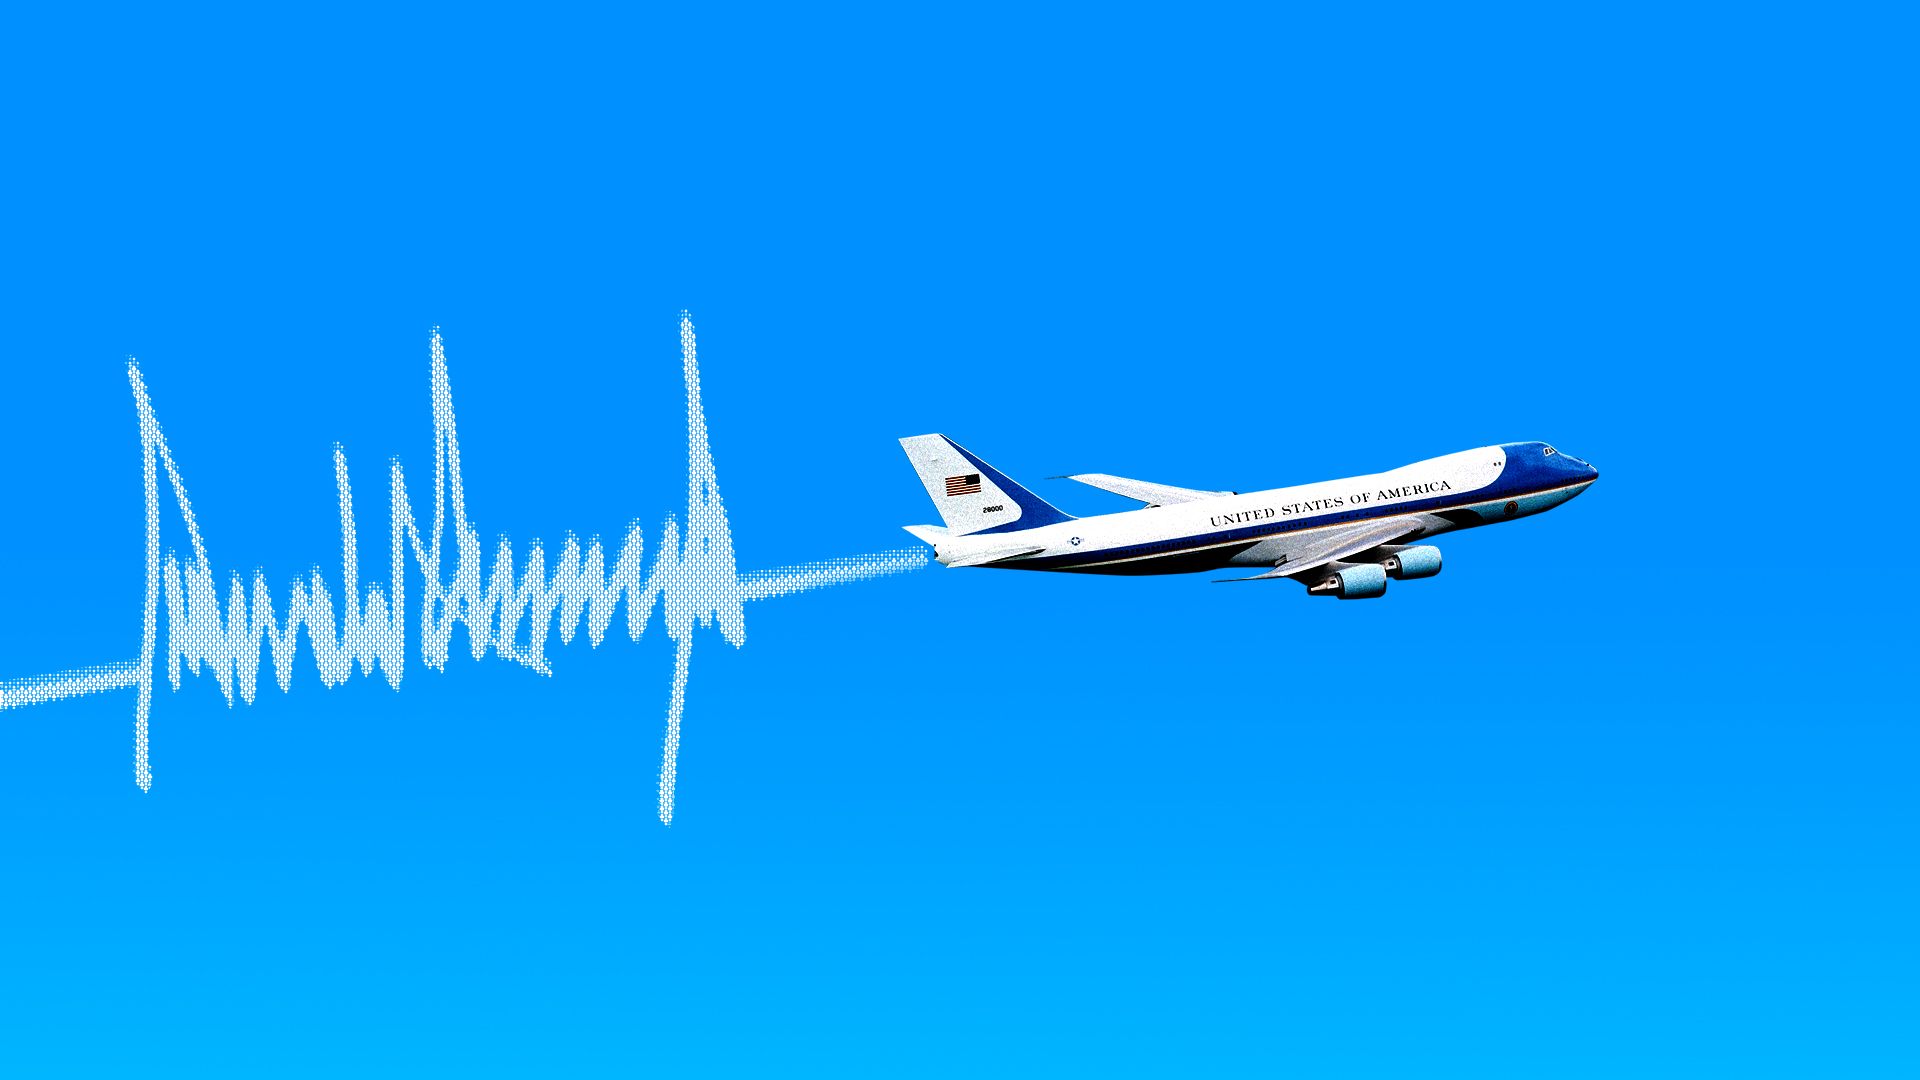 An illustration of Air Force One, with Donald Trump's signature in the place of the trails from the plane